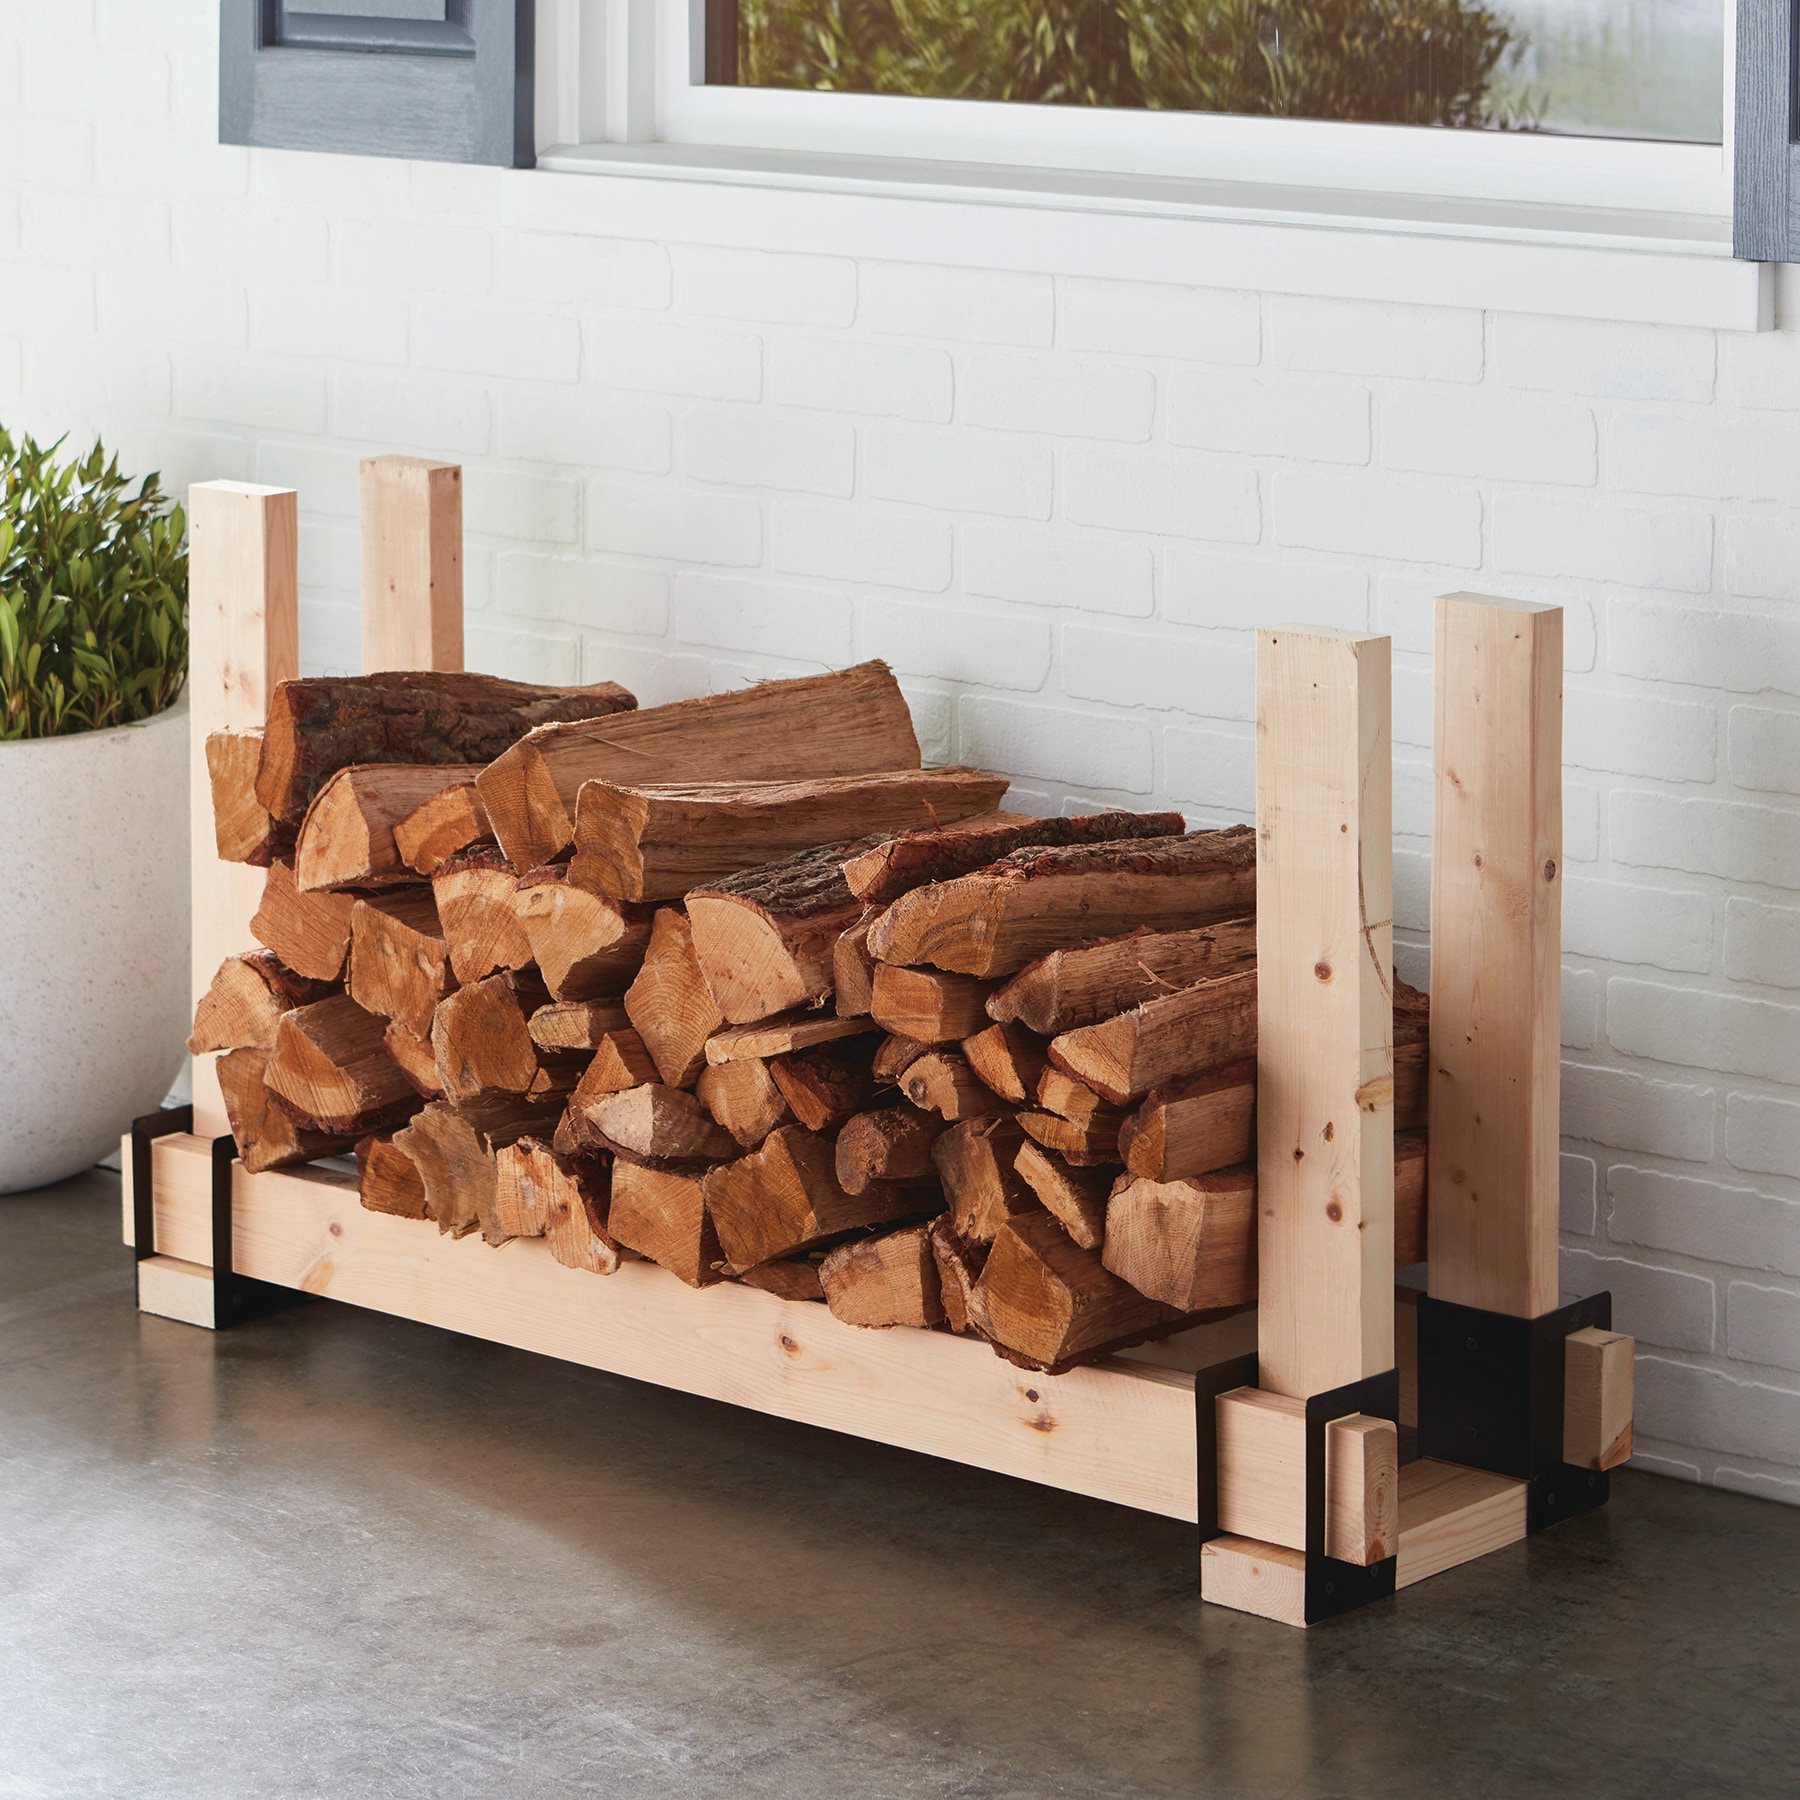 4ft OUTDOOR FIREWOOD LOG Rack Straight Side with storage crib